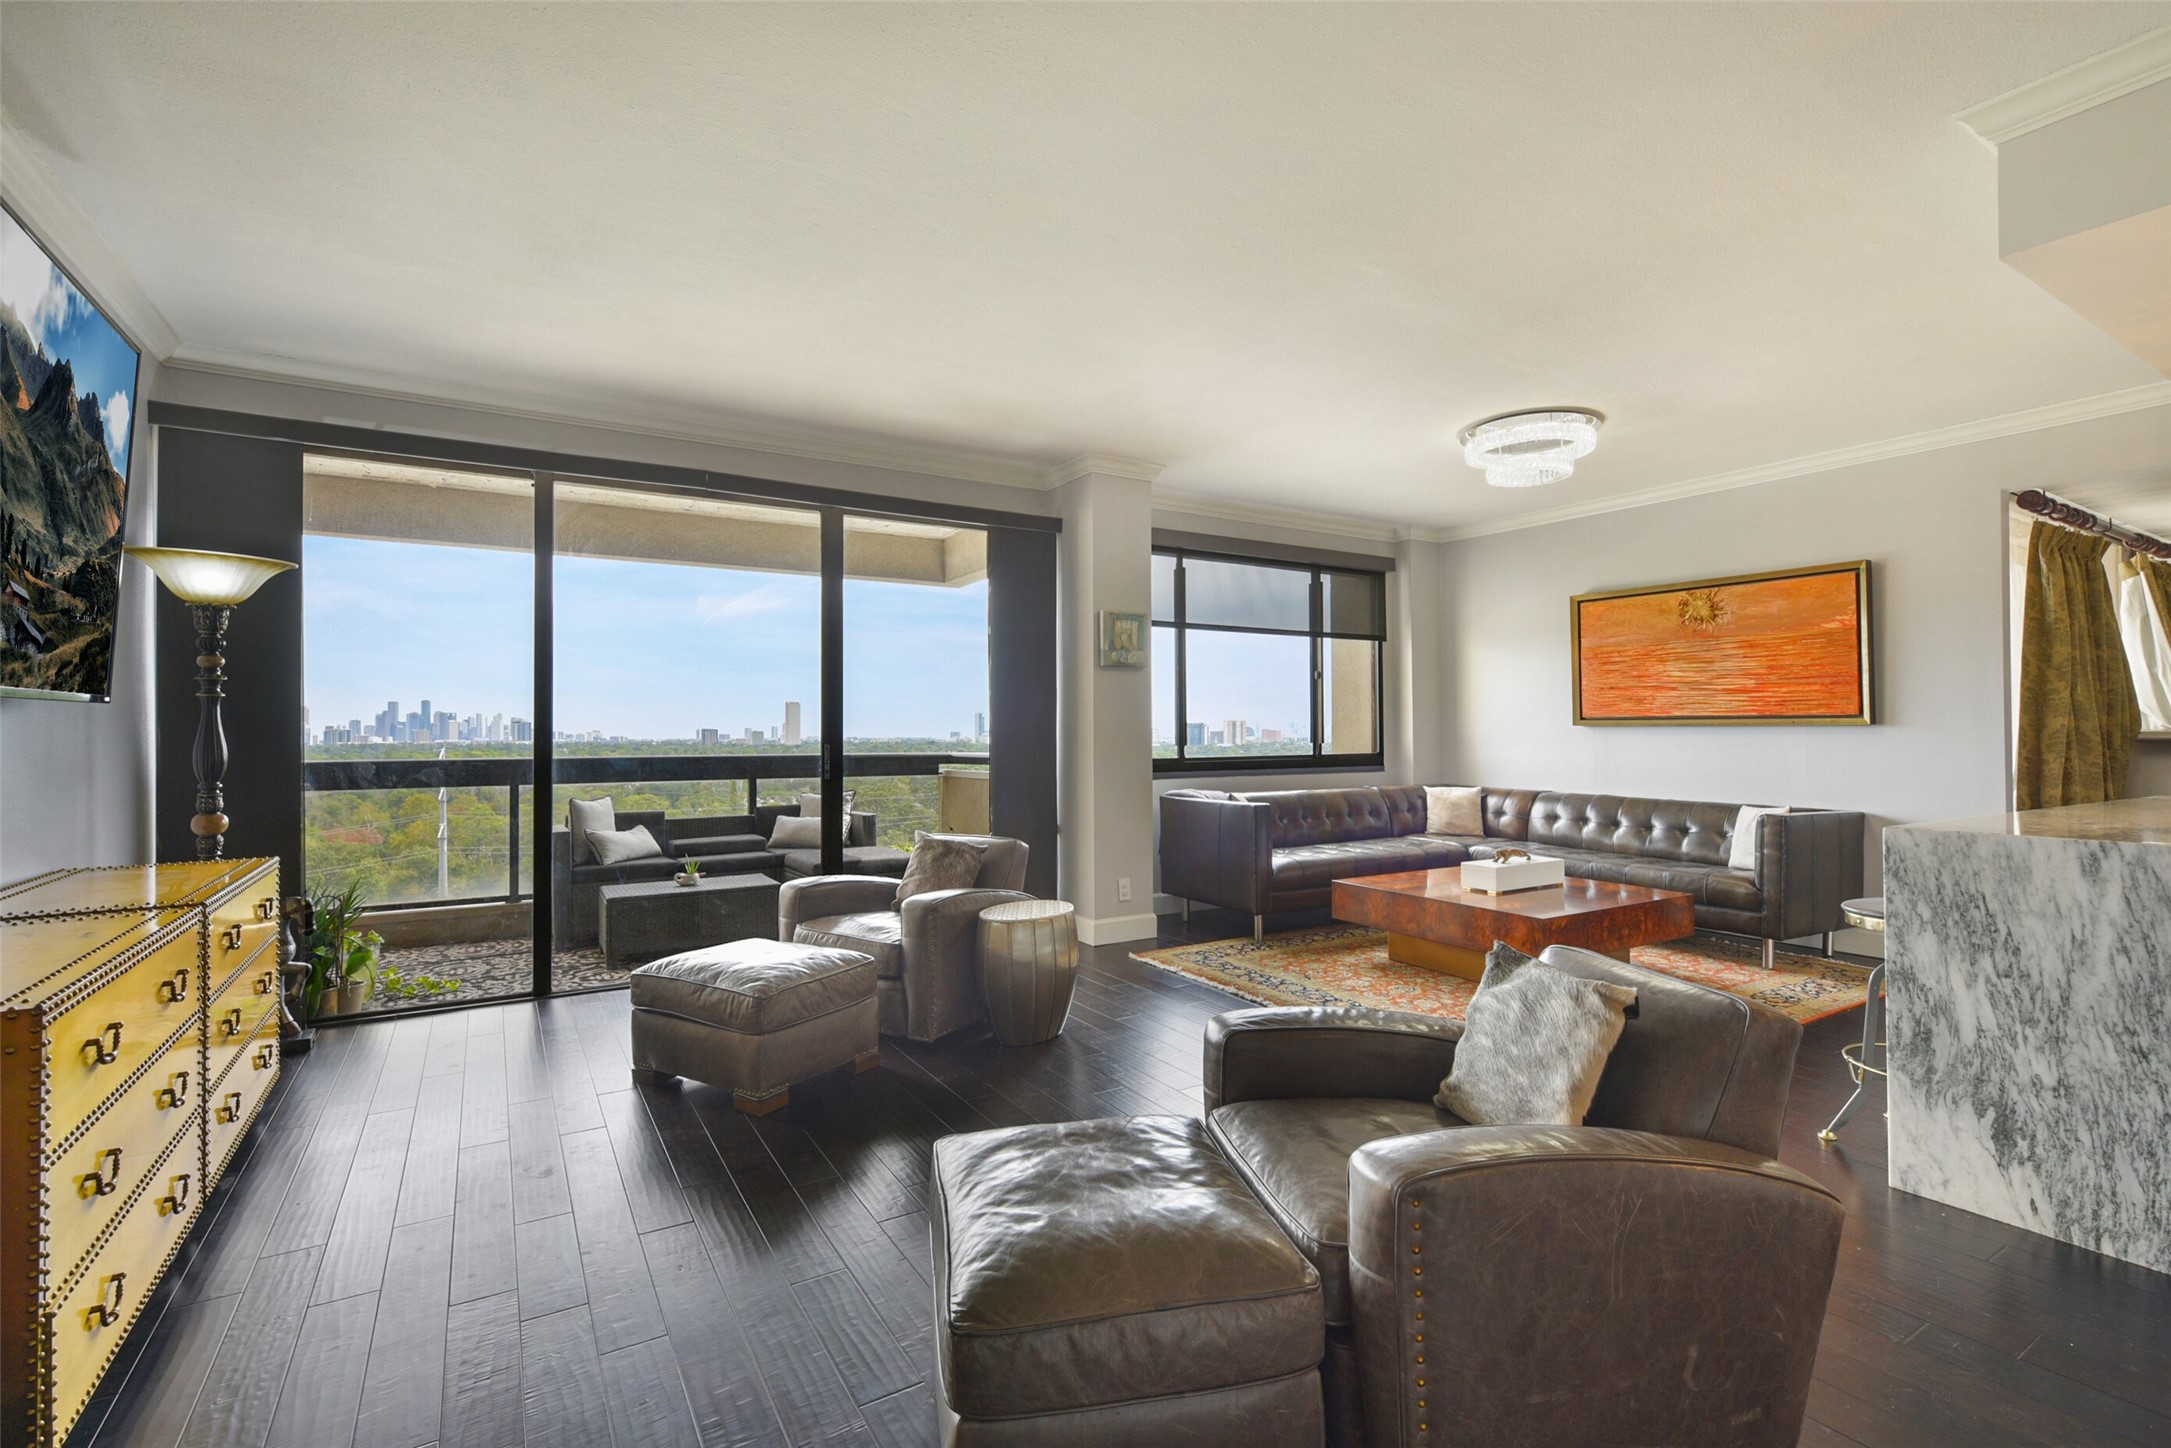 Step into the living area, adorned with rich wood floors and floor-to-ceiling windows that frame breathtaking views.